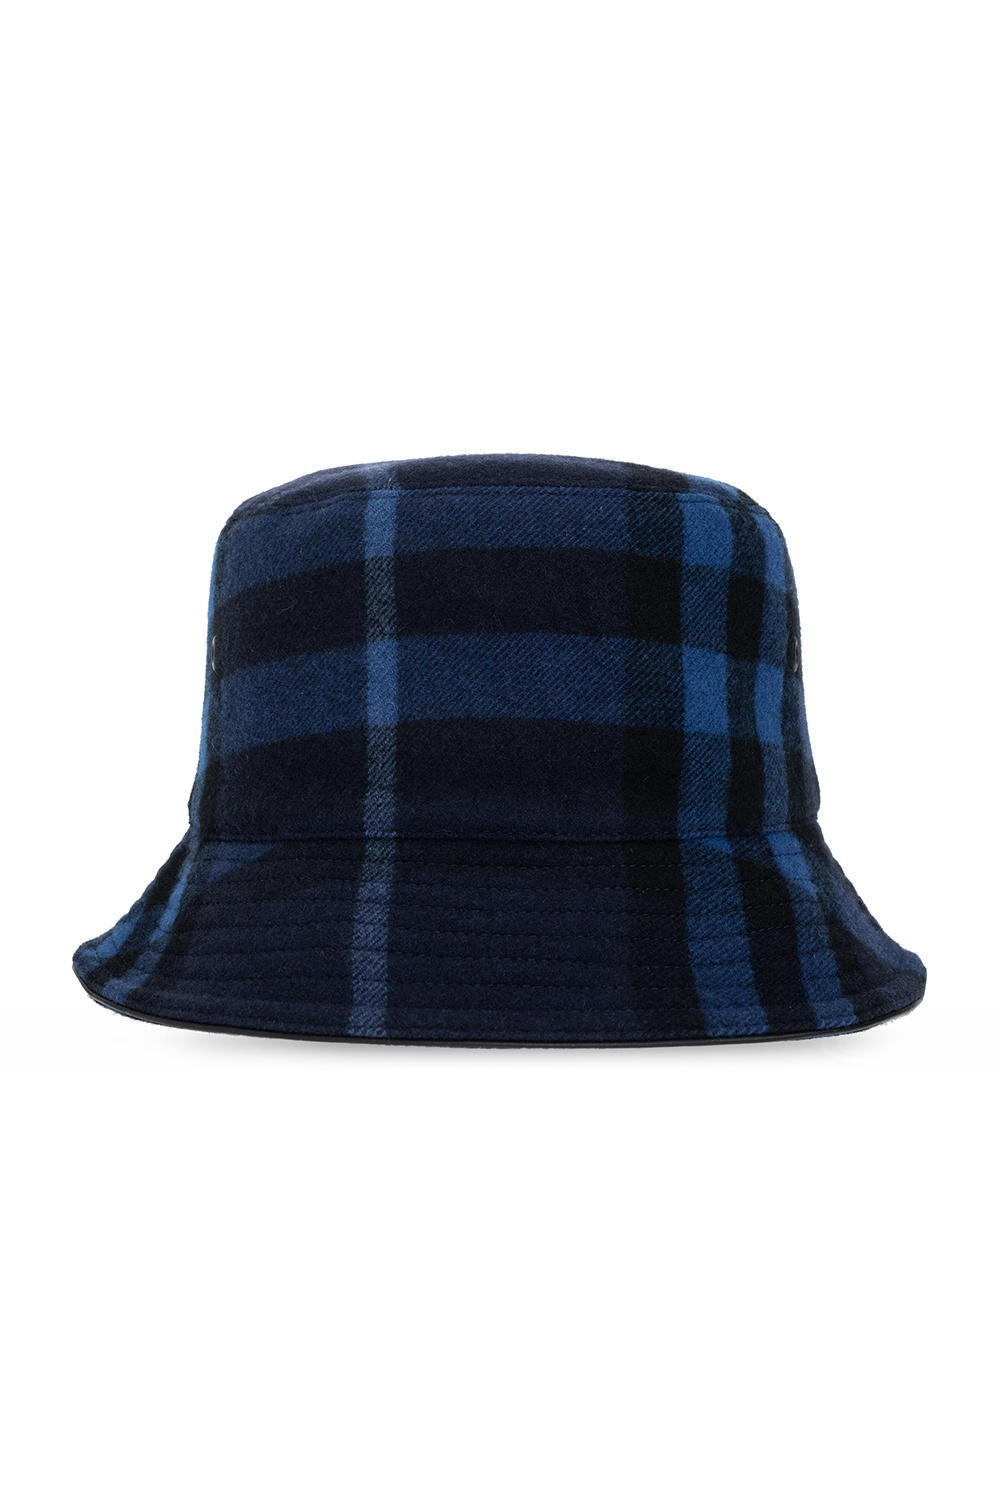 Burberry Hat with a plaid pattern